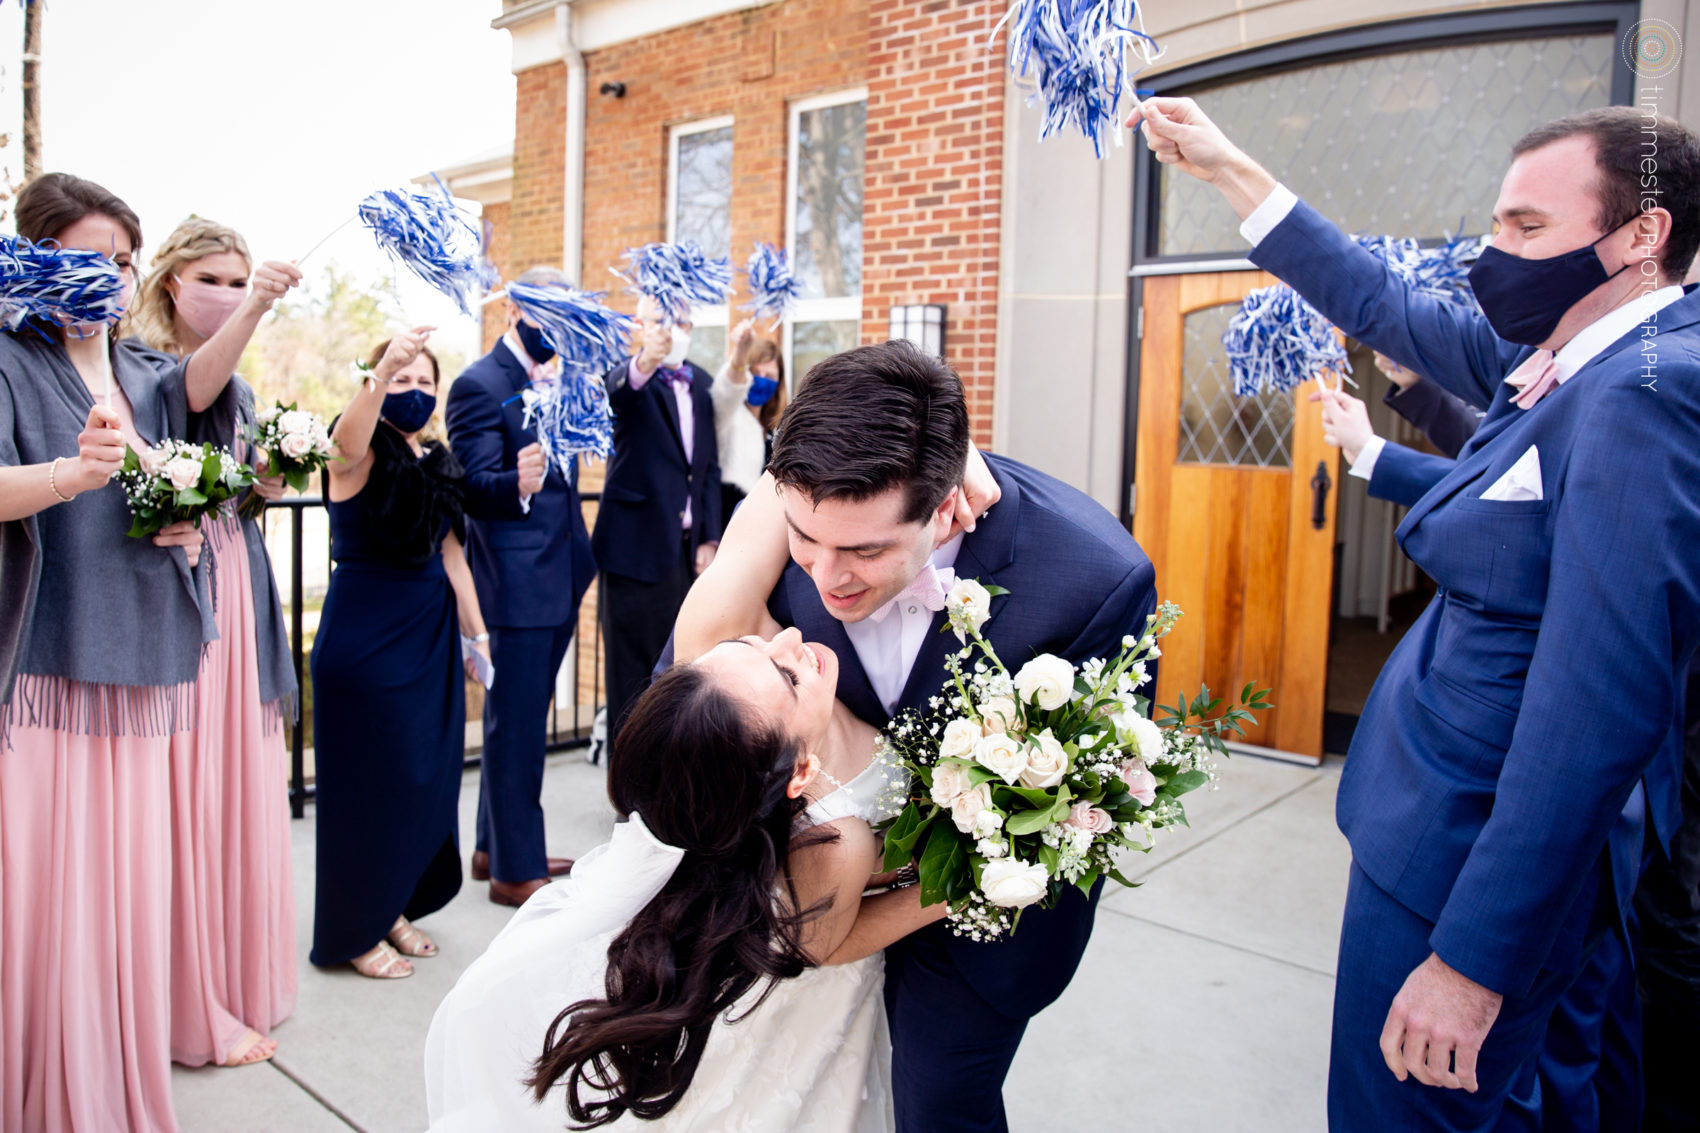 An exit with Duke University pom poms from their Chapel Hill church wedding